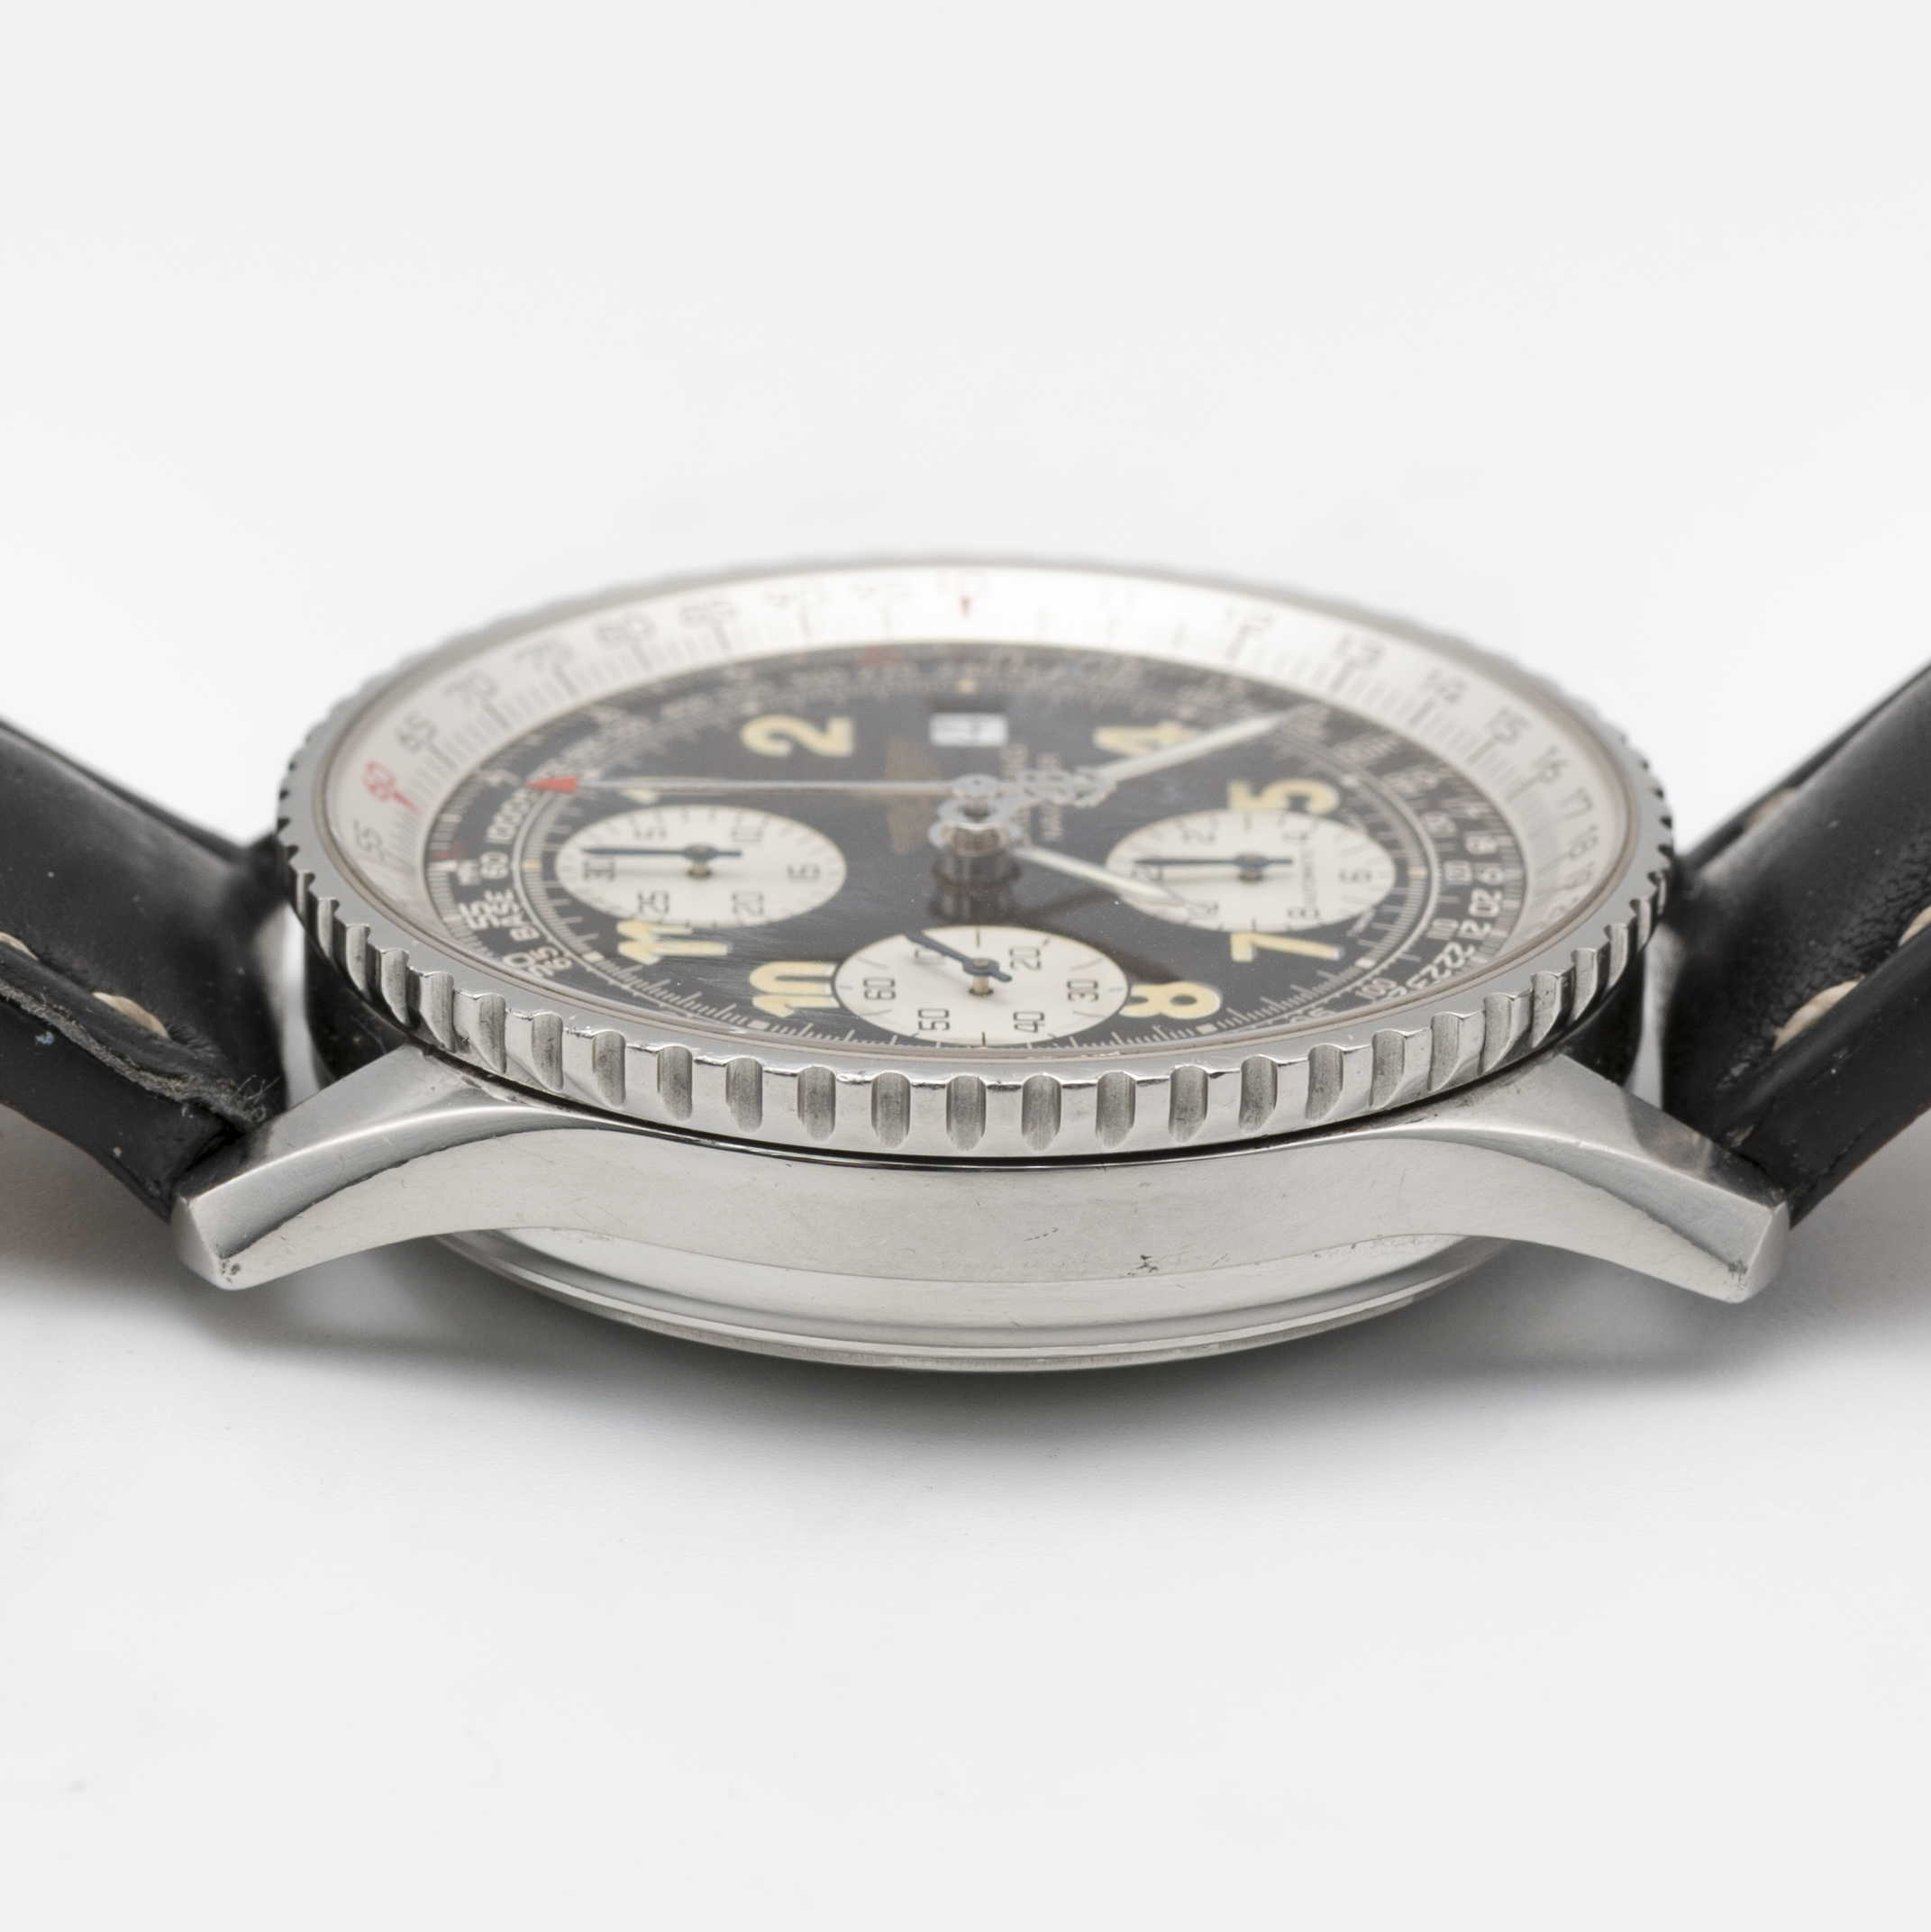 A GENTLEMAN'S STAINLESS STEEL BREITLING NAVITIMER AUTOMATIC CHRONOGRAPH WRIST WATCH CIRCA 1990s, - Image 8 of 8